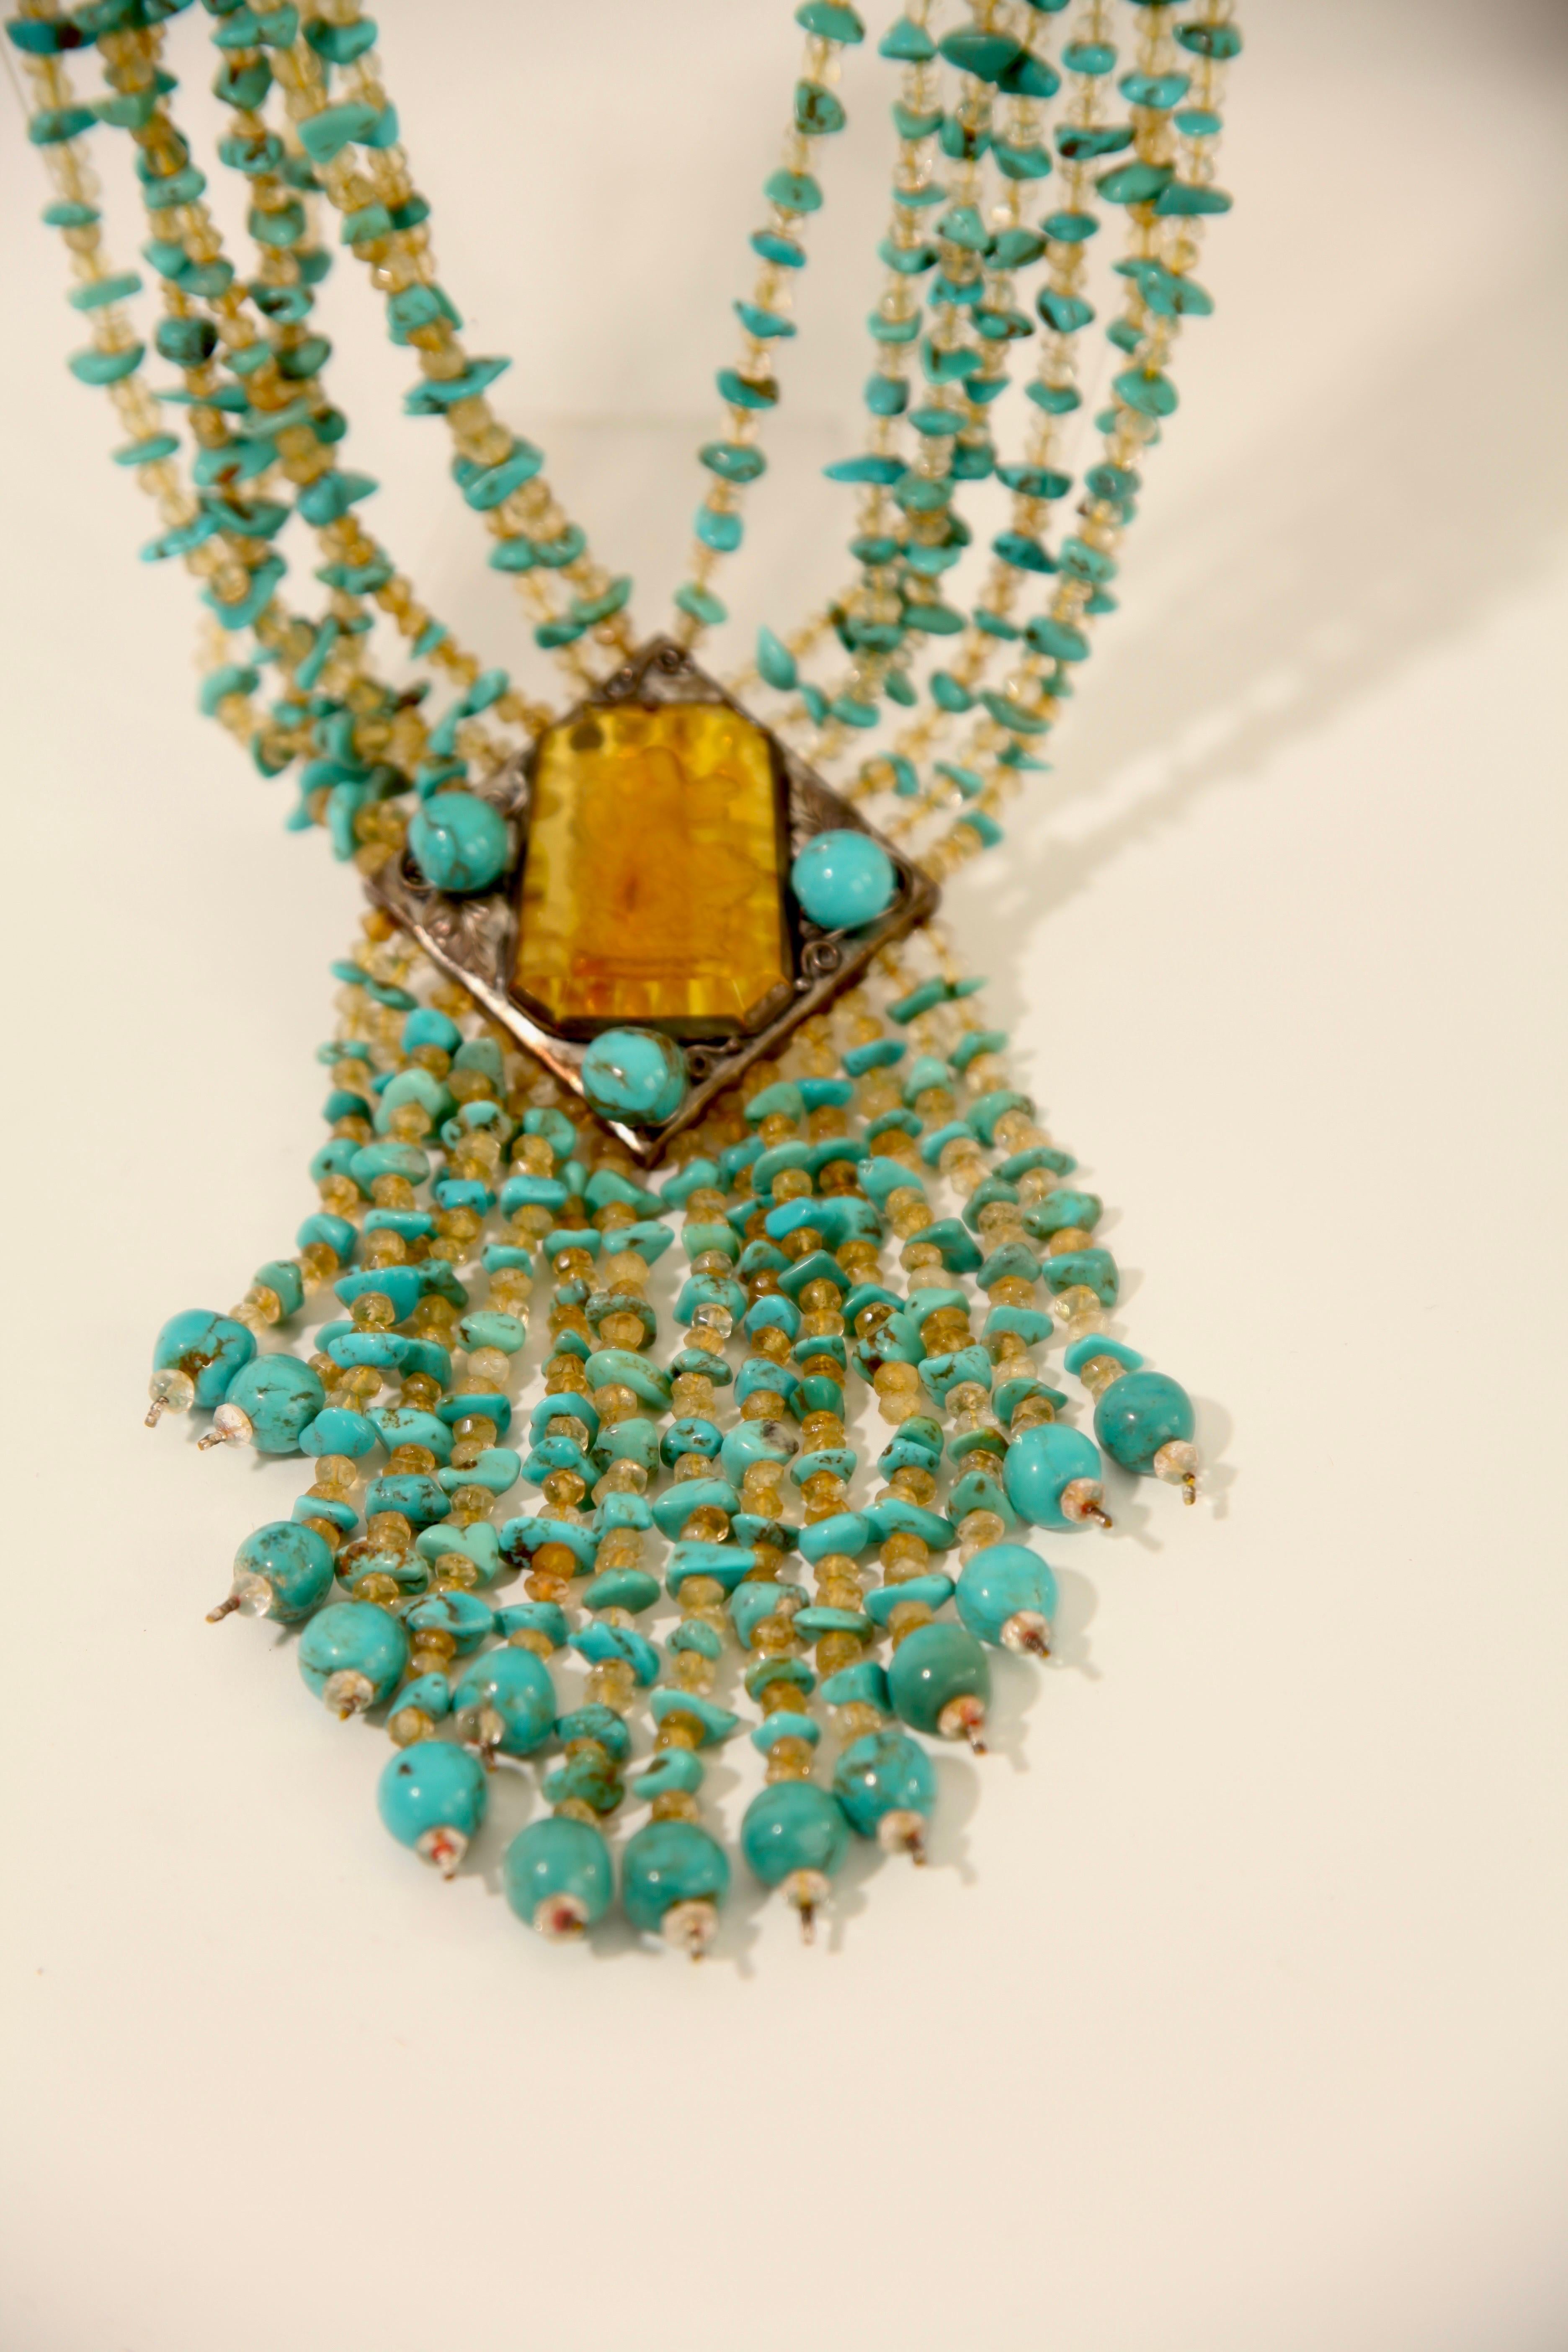 The word turquoise has been derived from Turkey because, in the 17th century, Turkish merchants and dealers took these gemstones to Europe through Turkey to sell them. When these traders introduced the Persian bluestone, the gemstone's name was